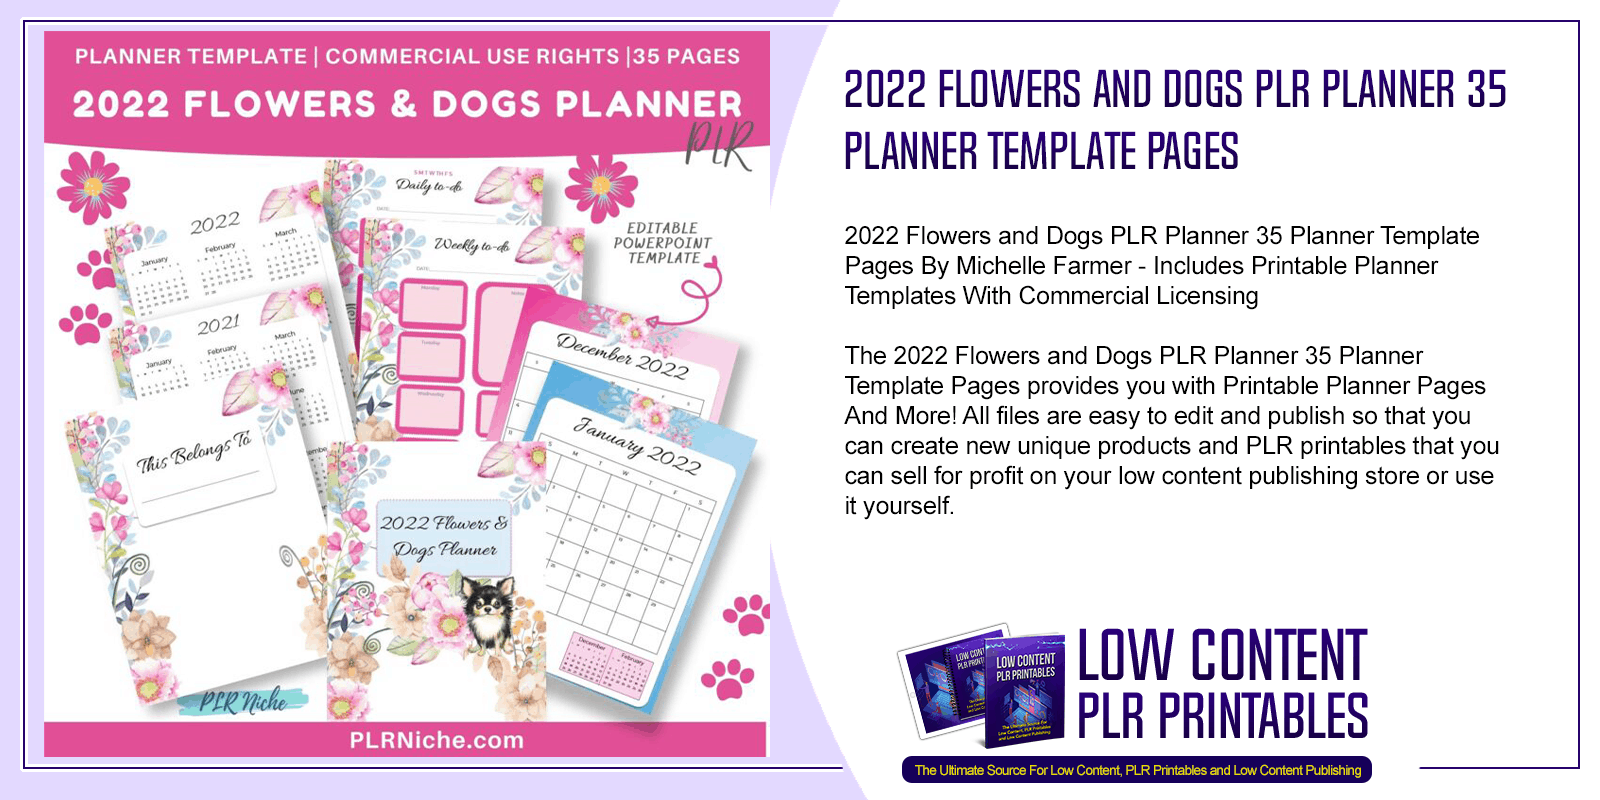 2022 Flowers and Dogs PLR Planner 35 Planner Template Pages